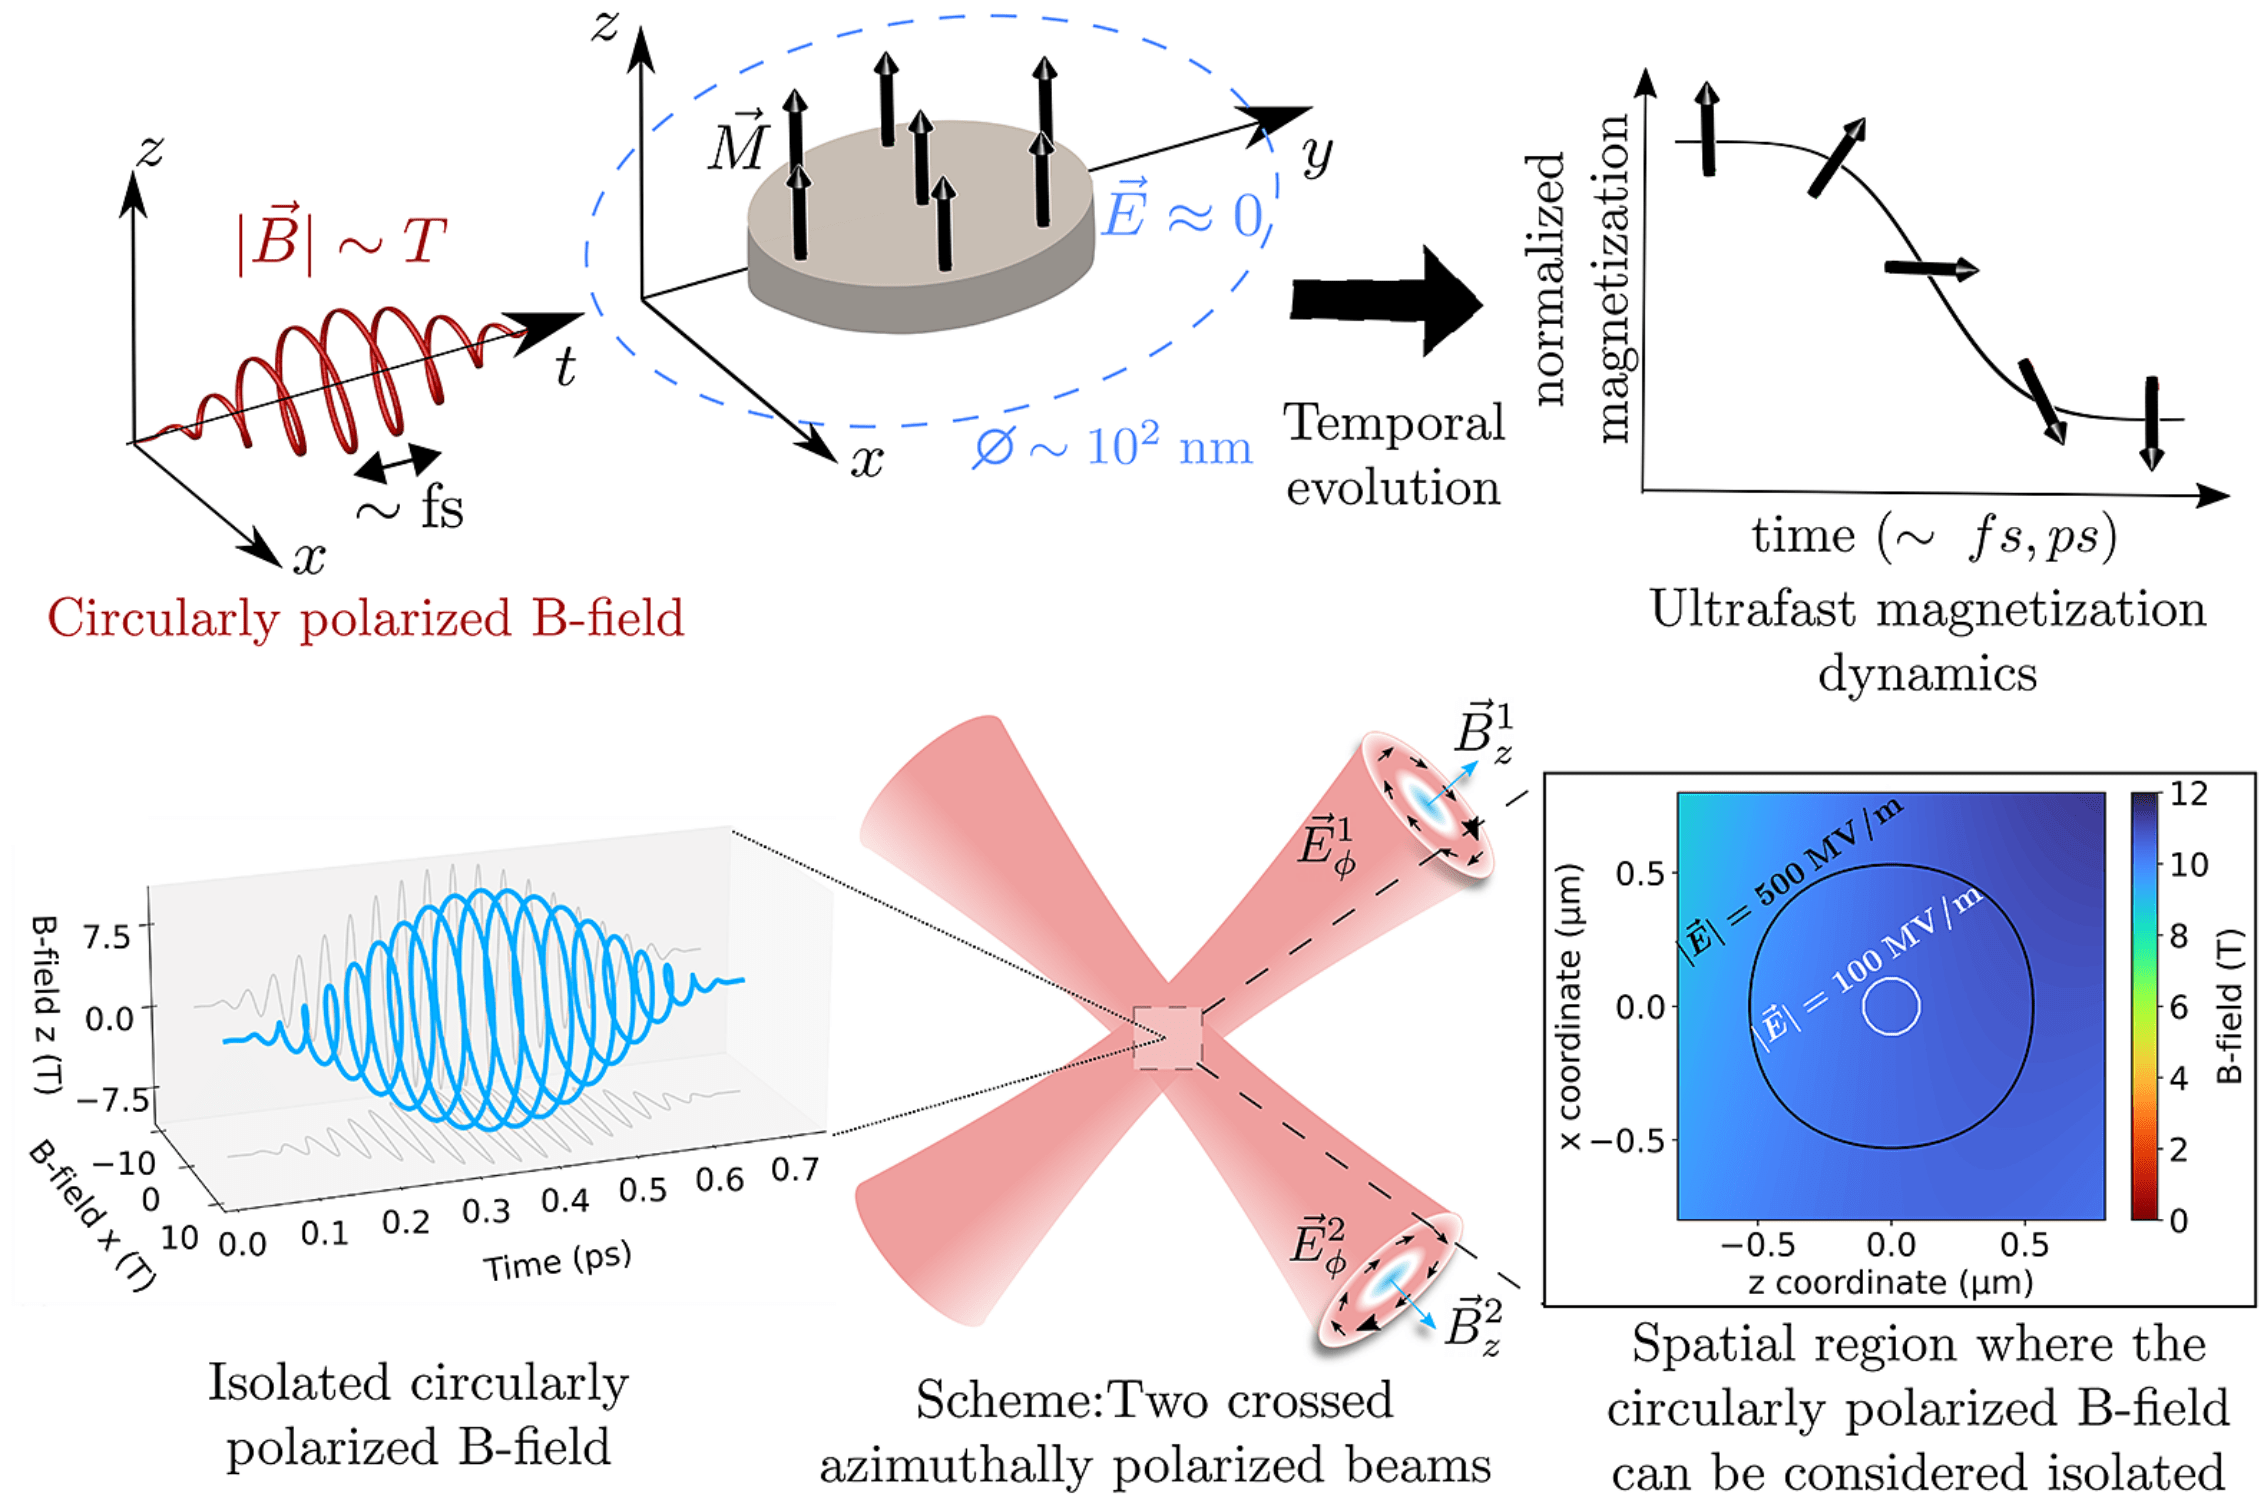 Triggering ultrafast magnetic dynamics using structured light